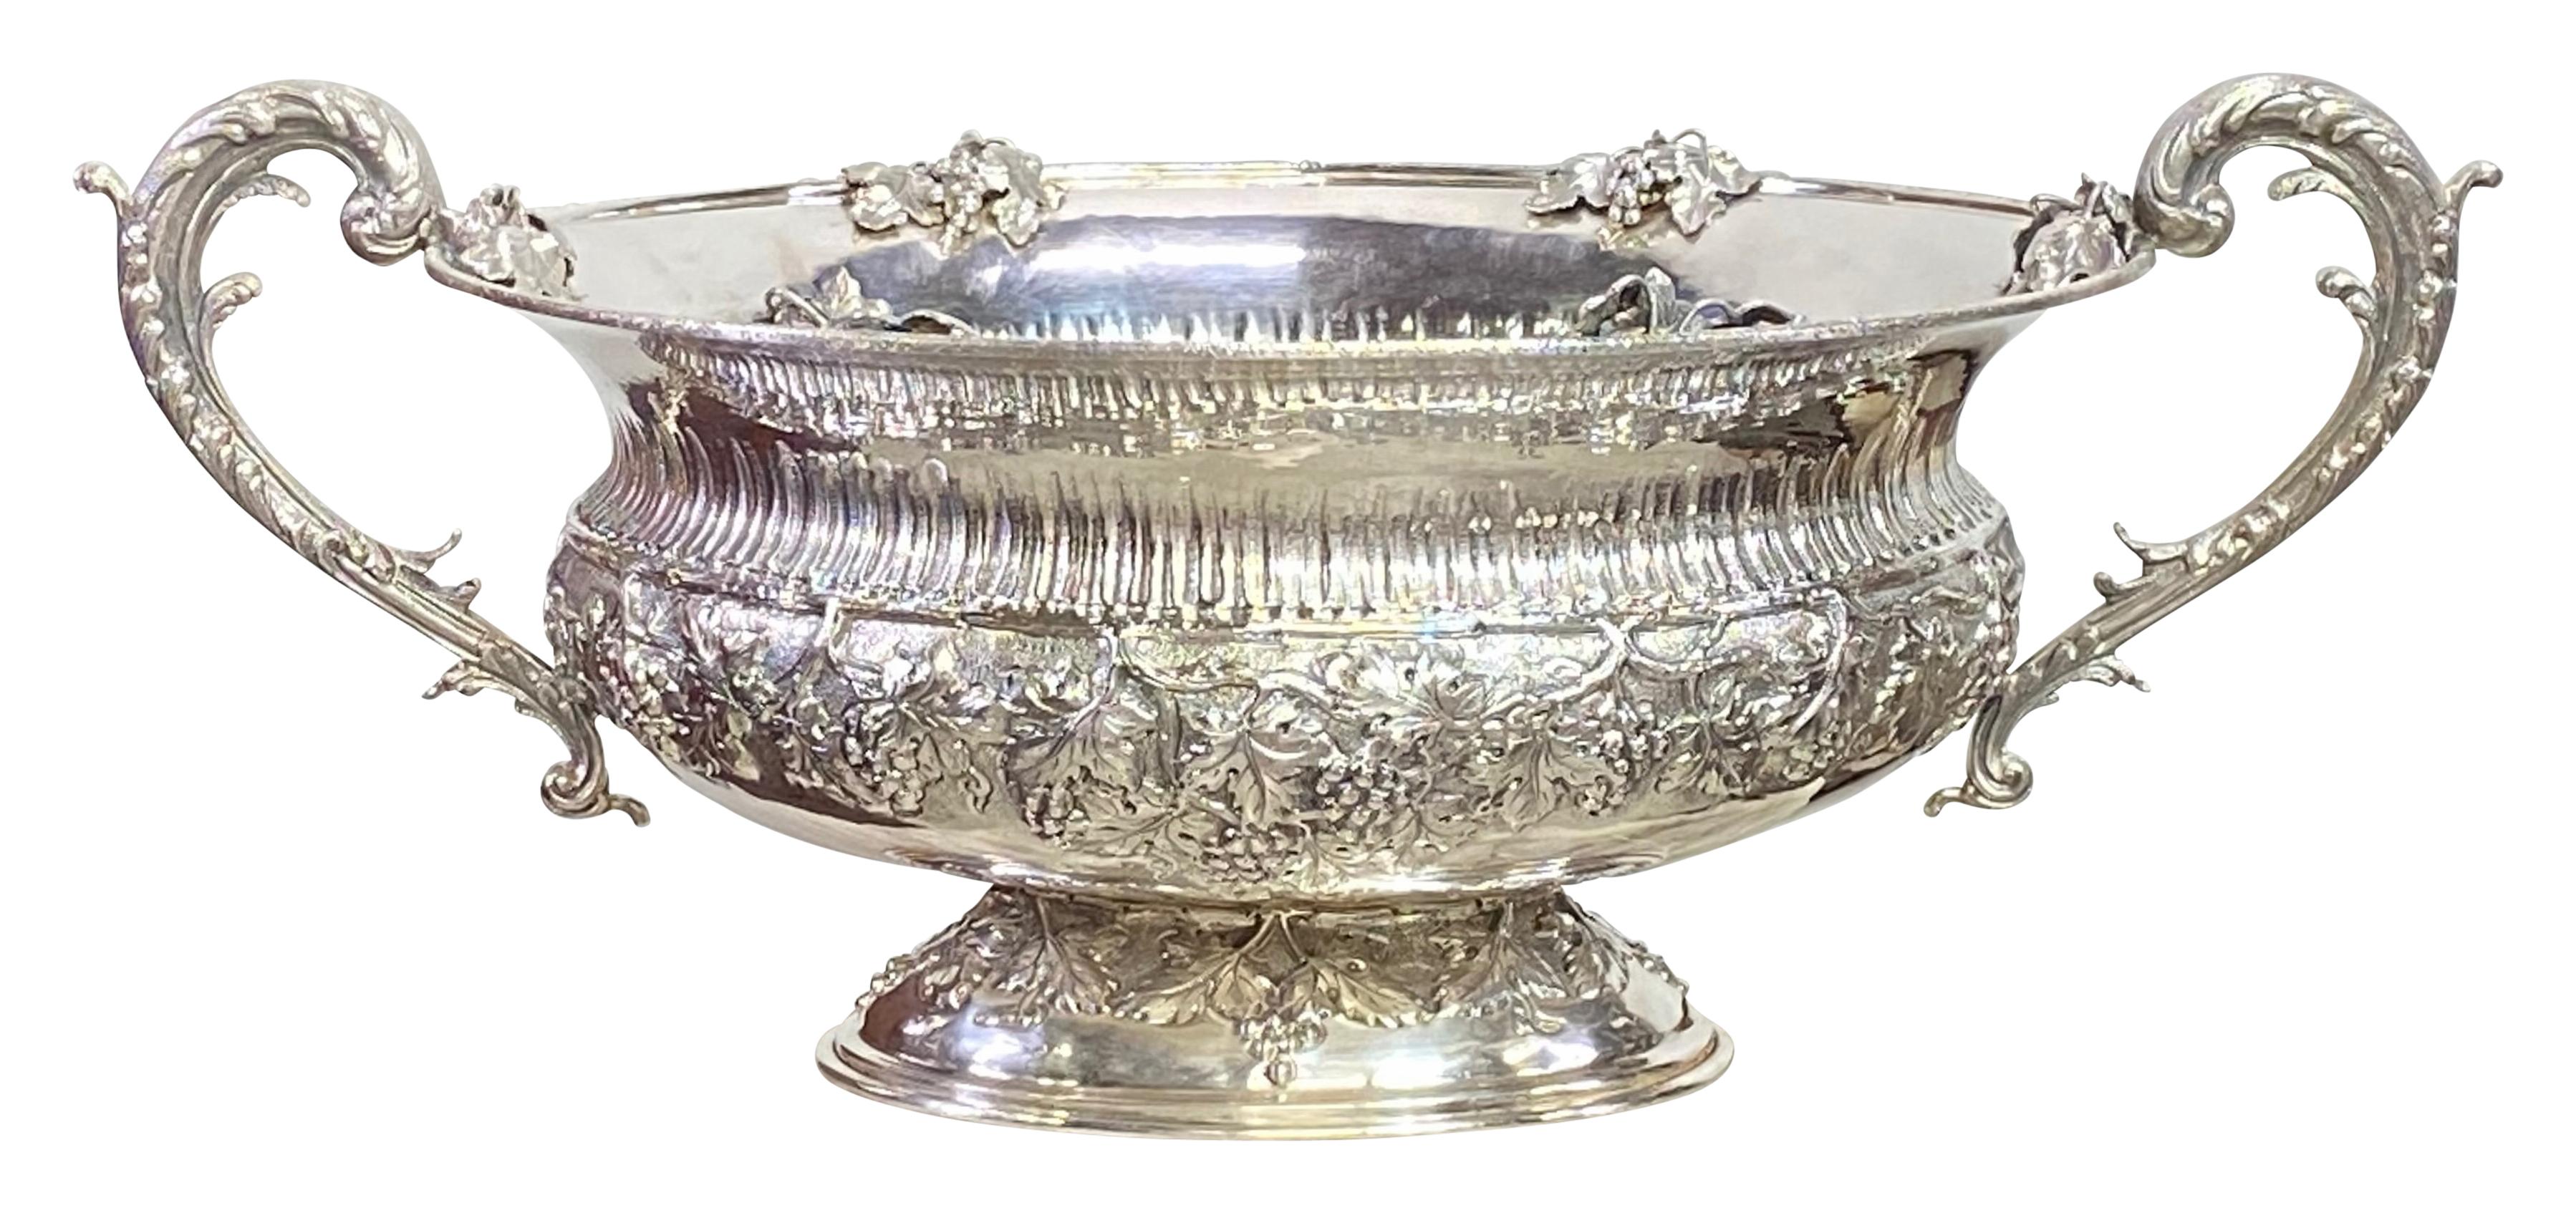 Beautiful quality and impressive hand repousse and chased sterling silver two handled wine cooler with grapevine design motif. Perfect to chill multiple bottles of wine.
Marked on the bottom V & B 925 and another mark that I cannot make out. I was